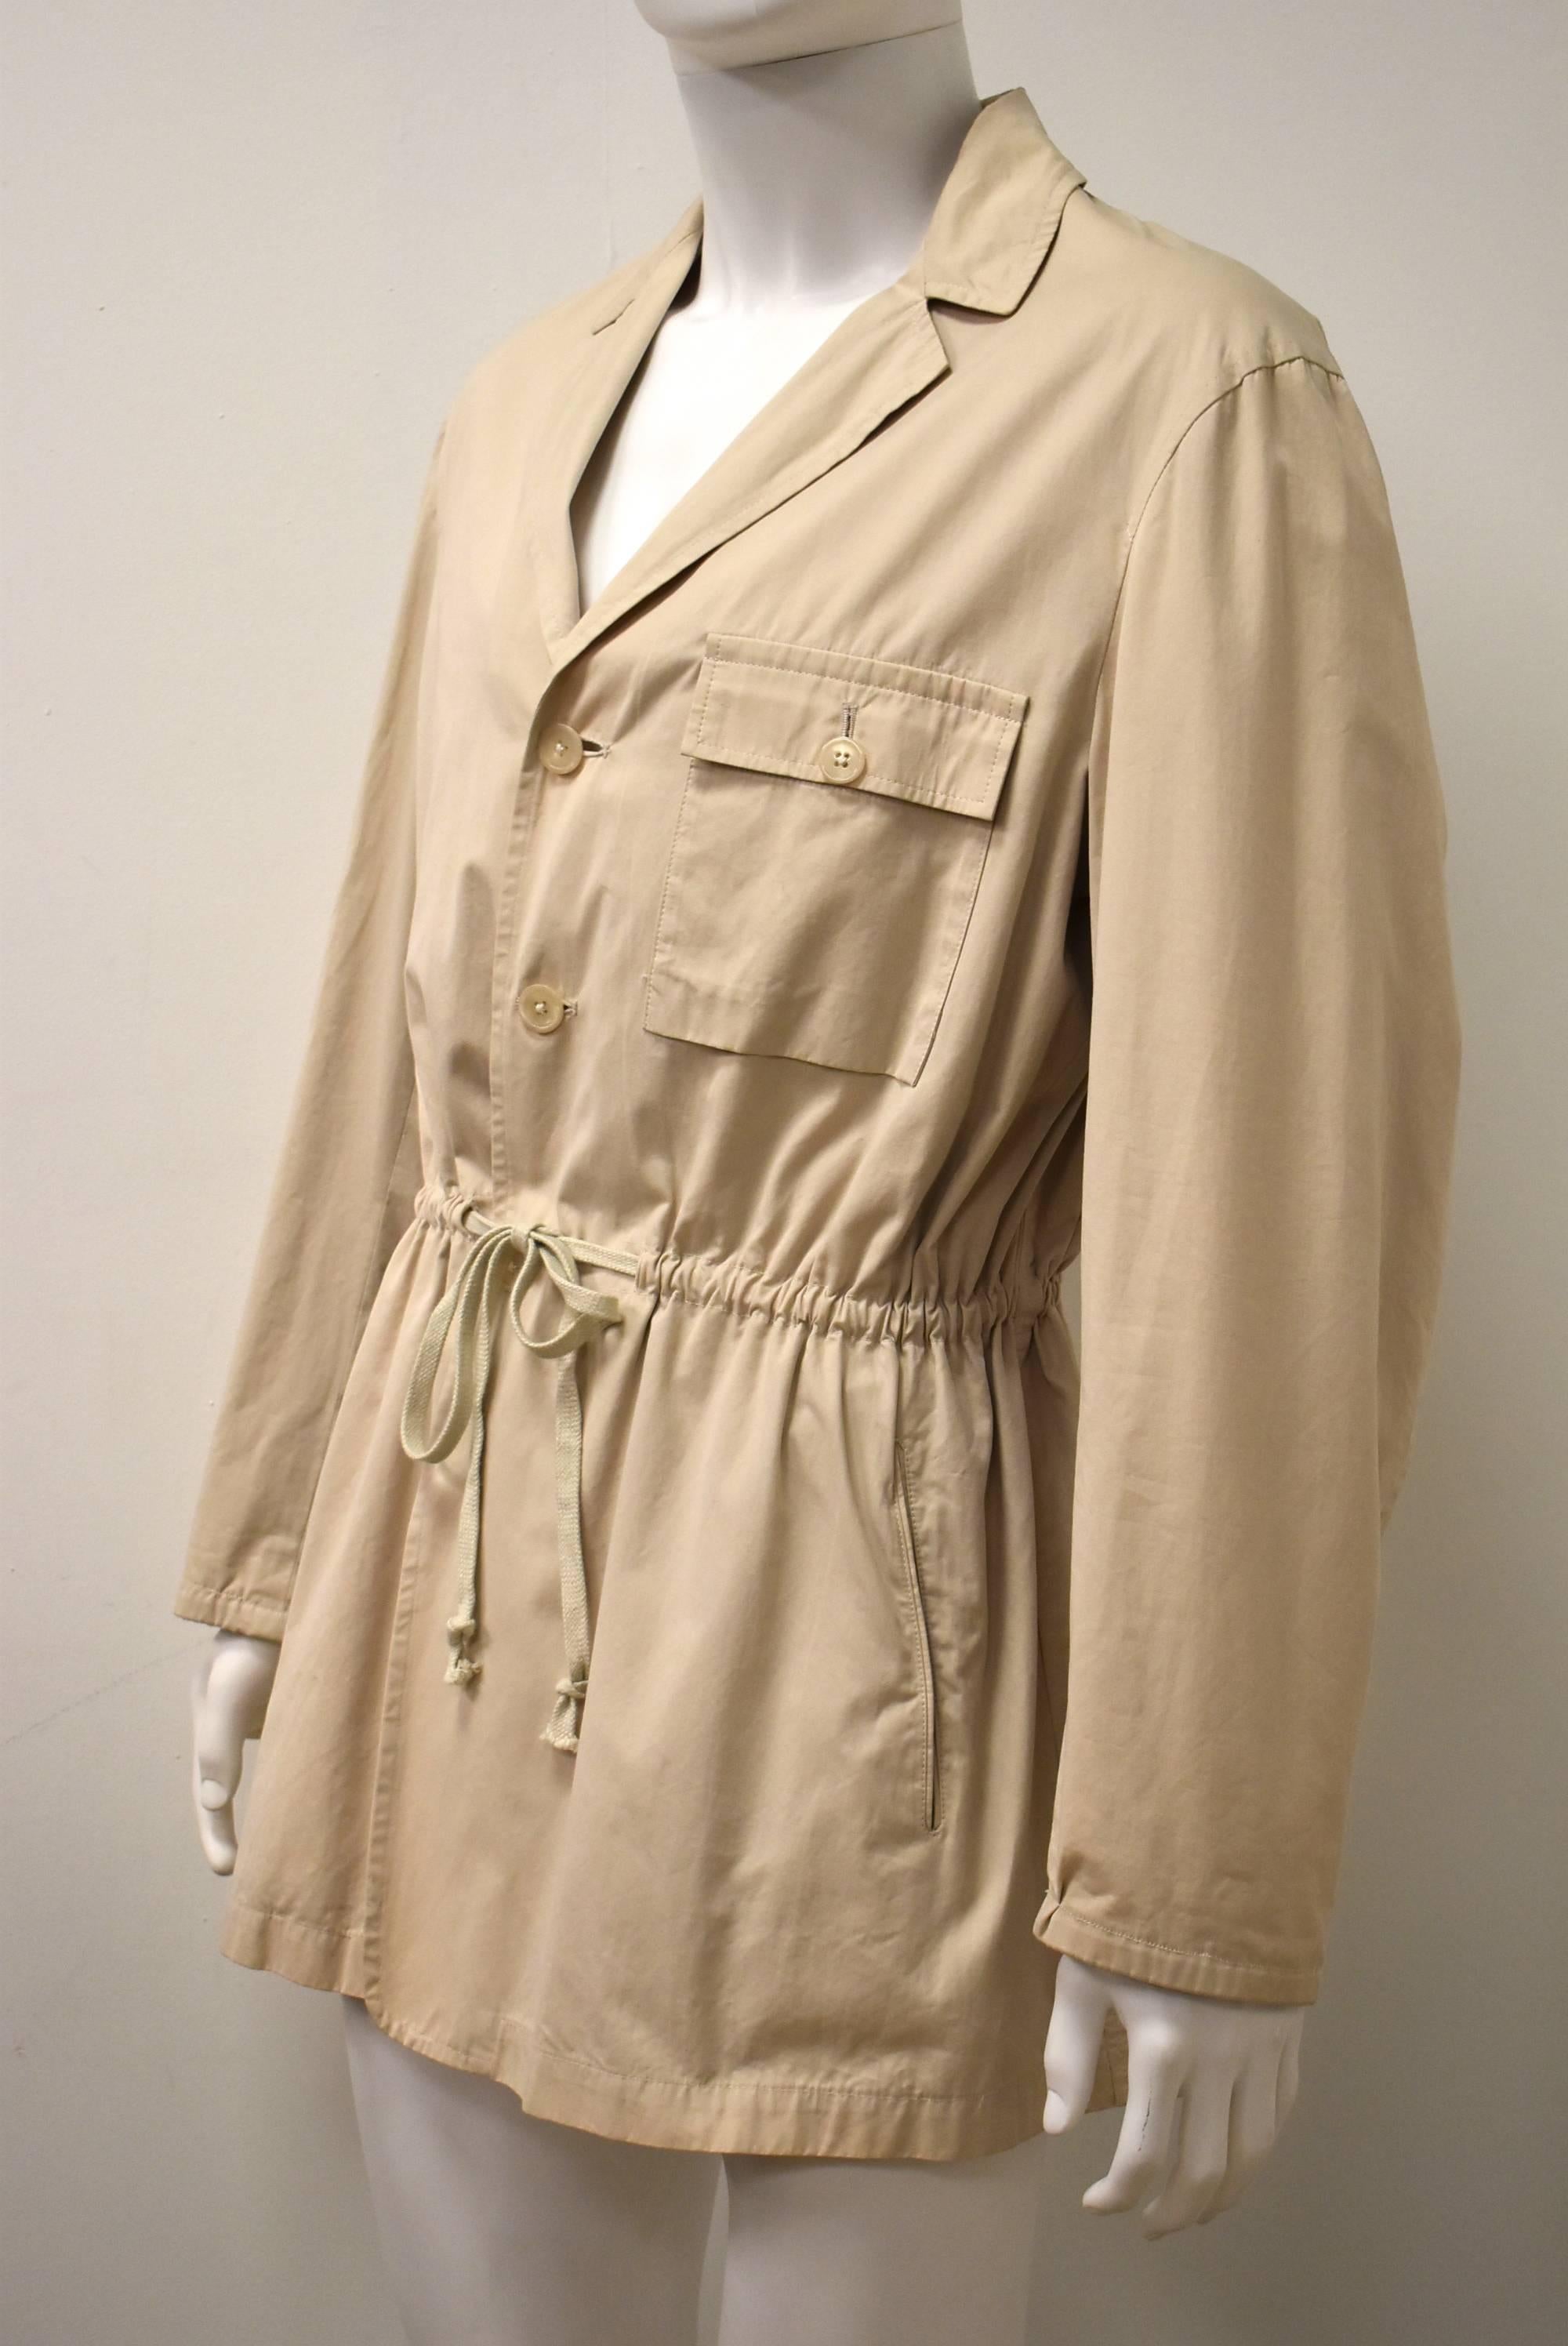 A cream coloured ’Safari’ style jacket by Japanese designer Yohji Yamamoto dating from the 1980’s. The jacket has a simple shape with a drawstring at the waist to create a fitted silhouette. It has a button-down front, two pockets at the hip and a